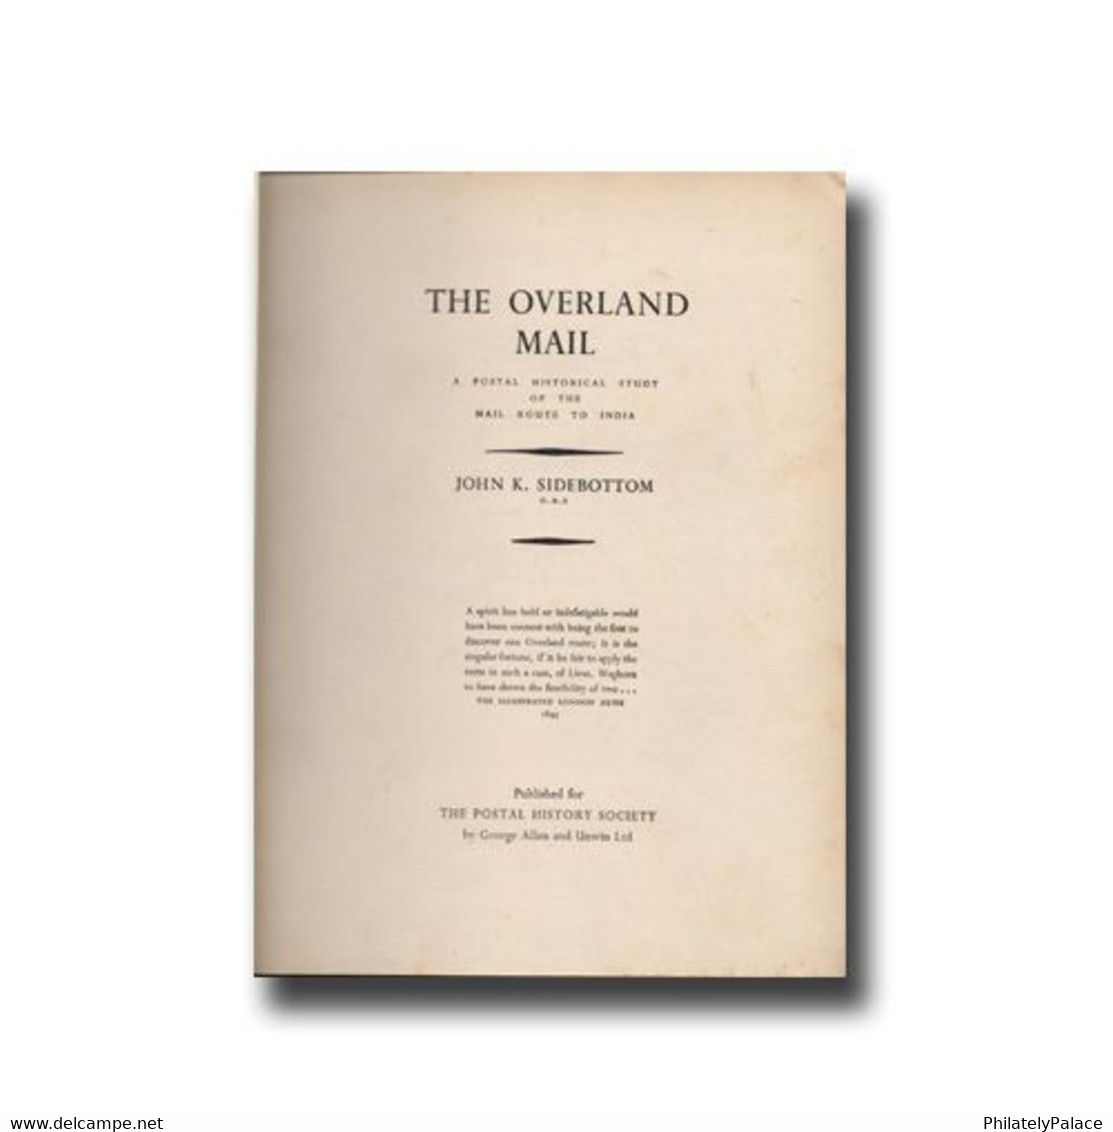 The Overland Mail By Waghorn By John K. Sidebottom Original Hard Bound  (**) Limited Issue - Philately And Postal History